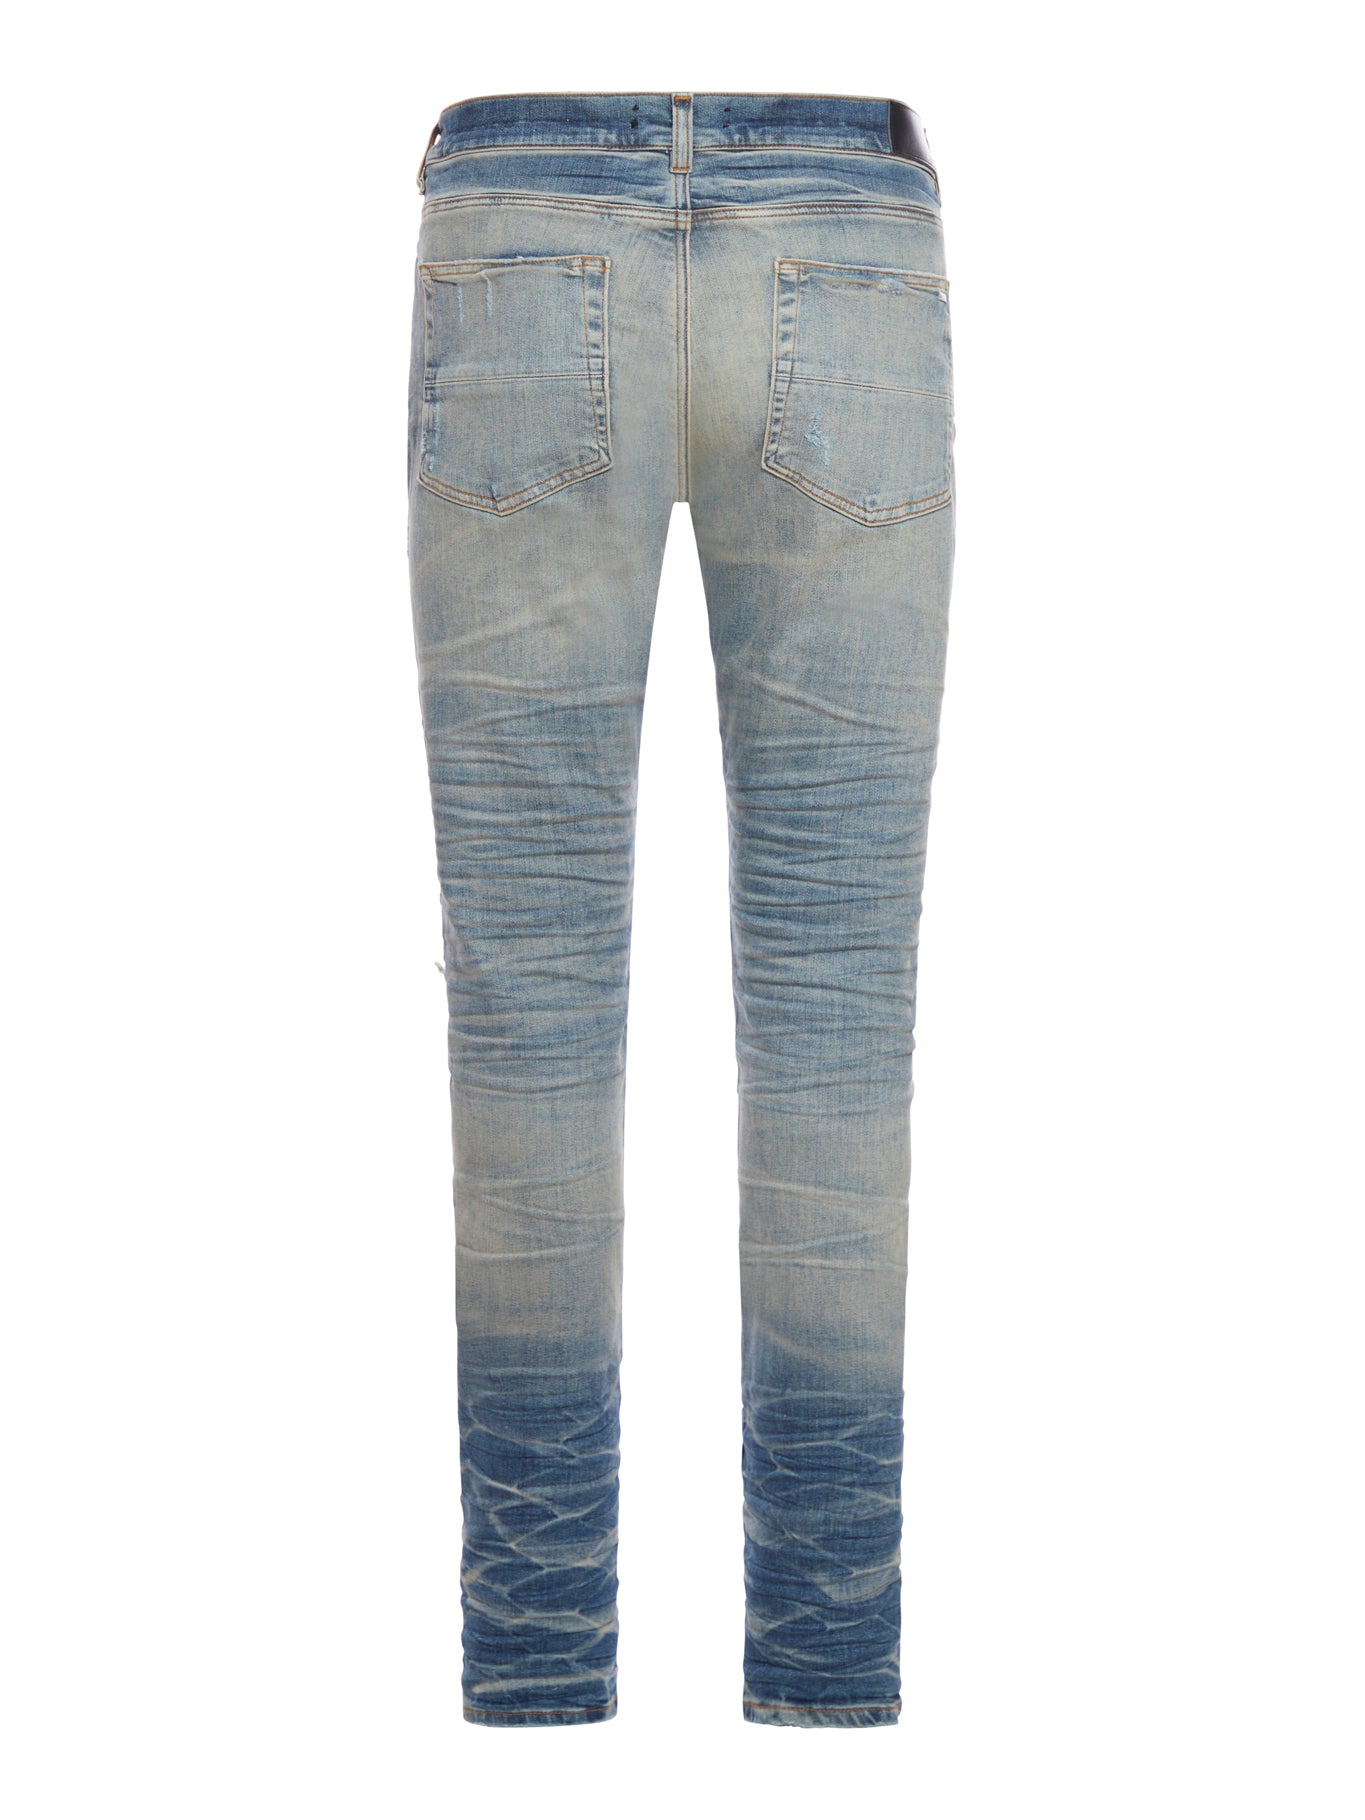 AMIRI BLUE JEANS WITH VINTAGE EFFECT